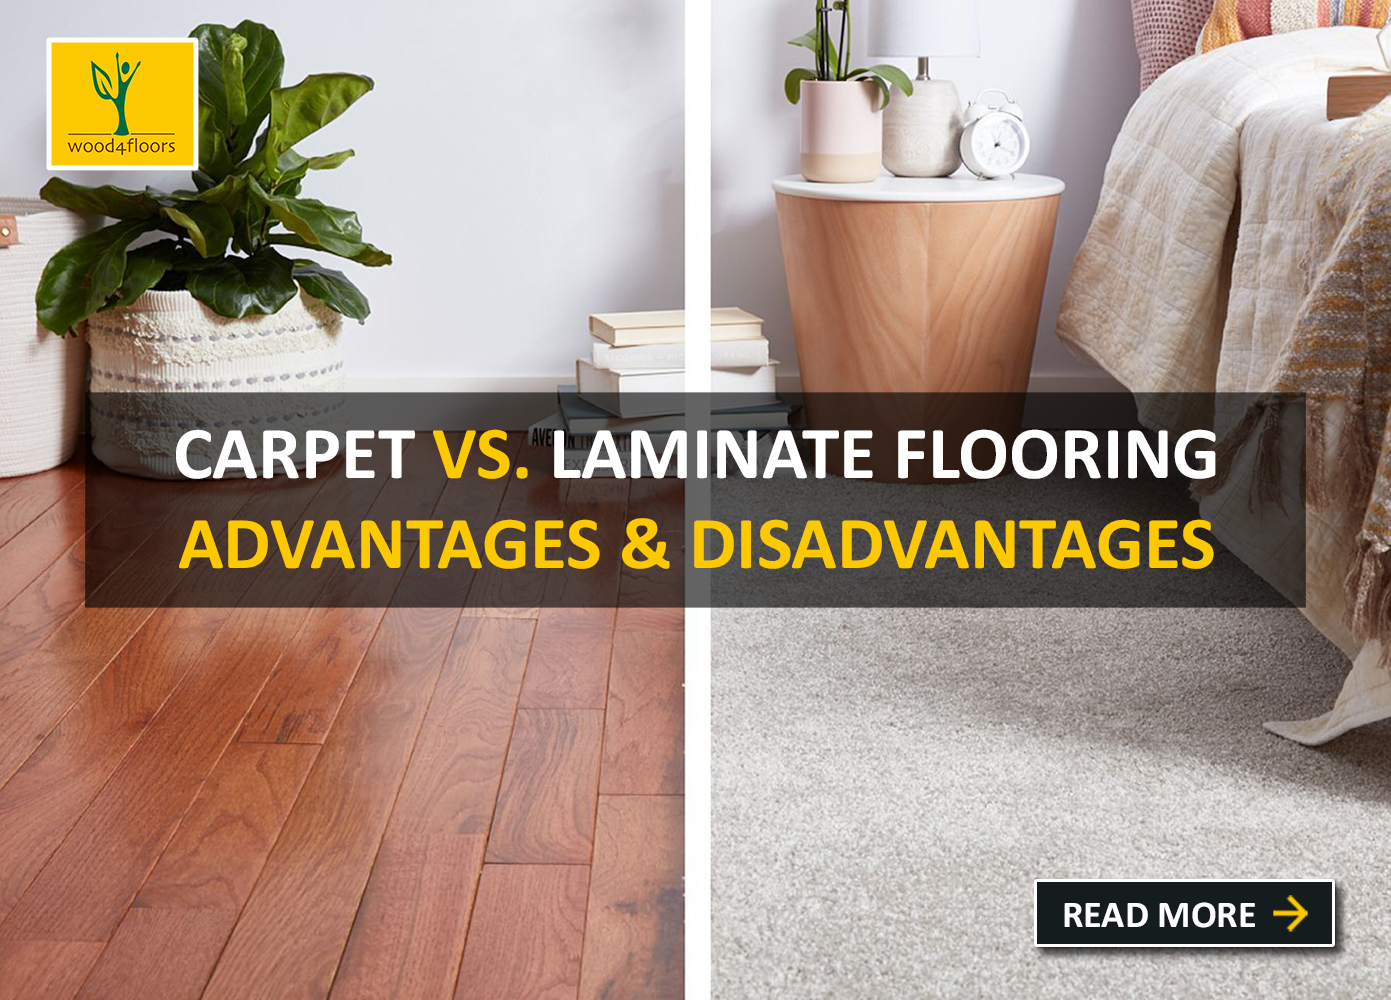 Which Is Warmer? Carpet or Laminate Flooring